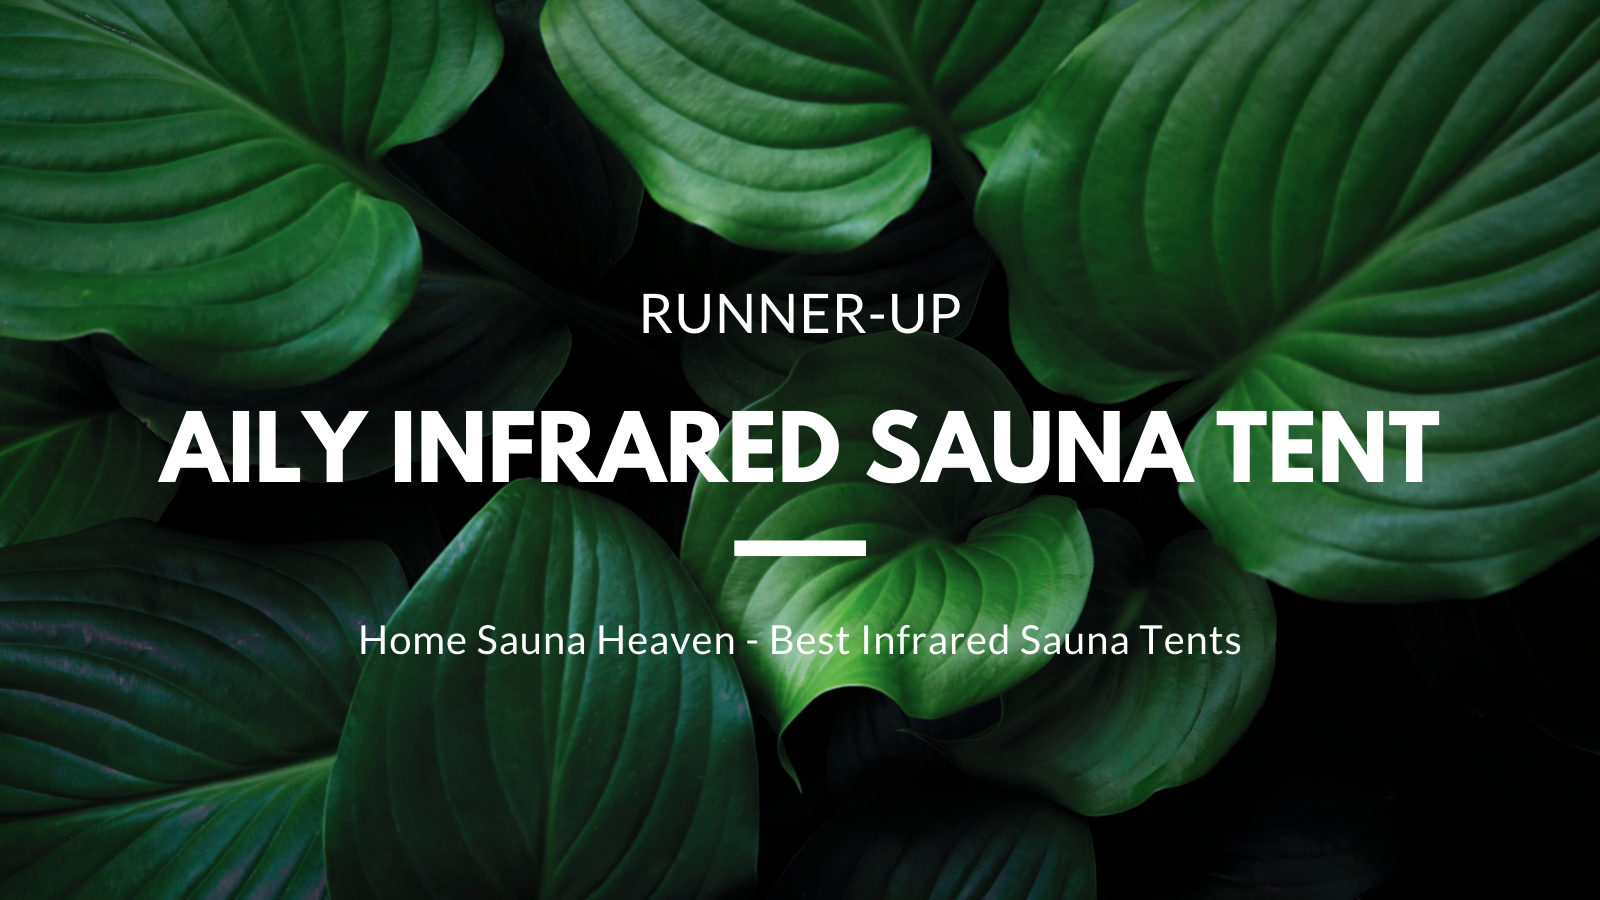 AILY INFRARED SAUNA TENT